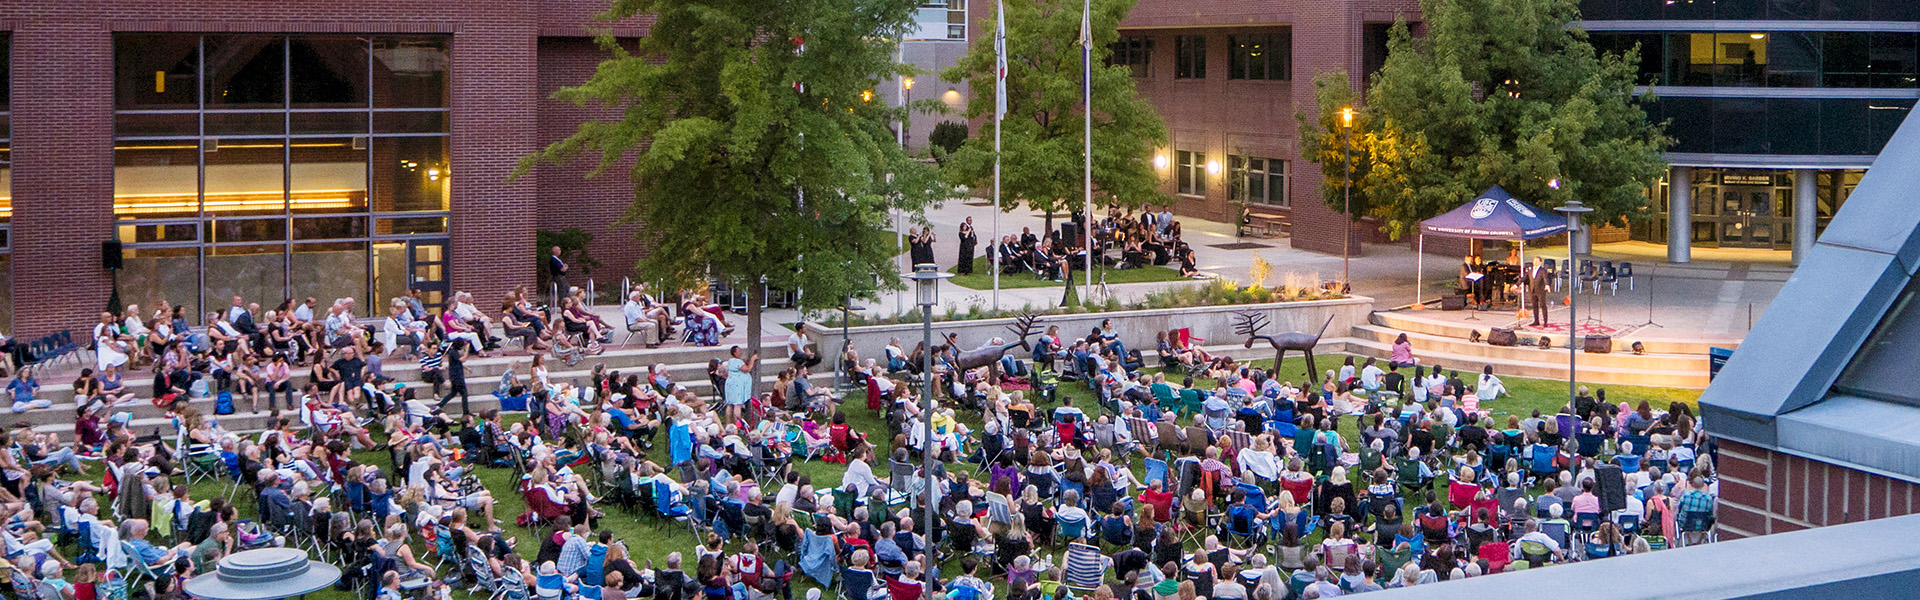 Attendees in the courtyard watching a performance at Opera Under the Stars.